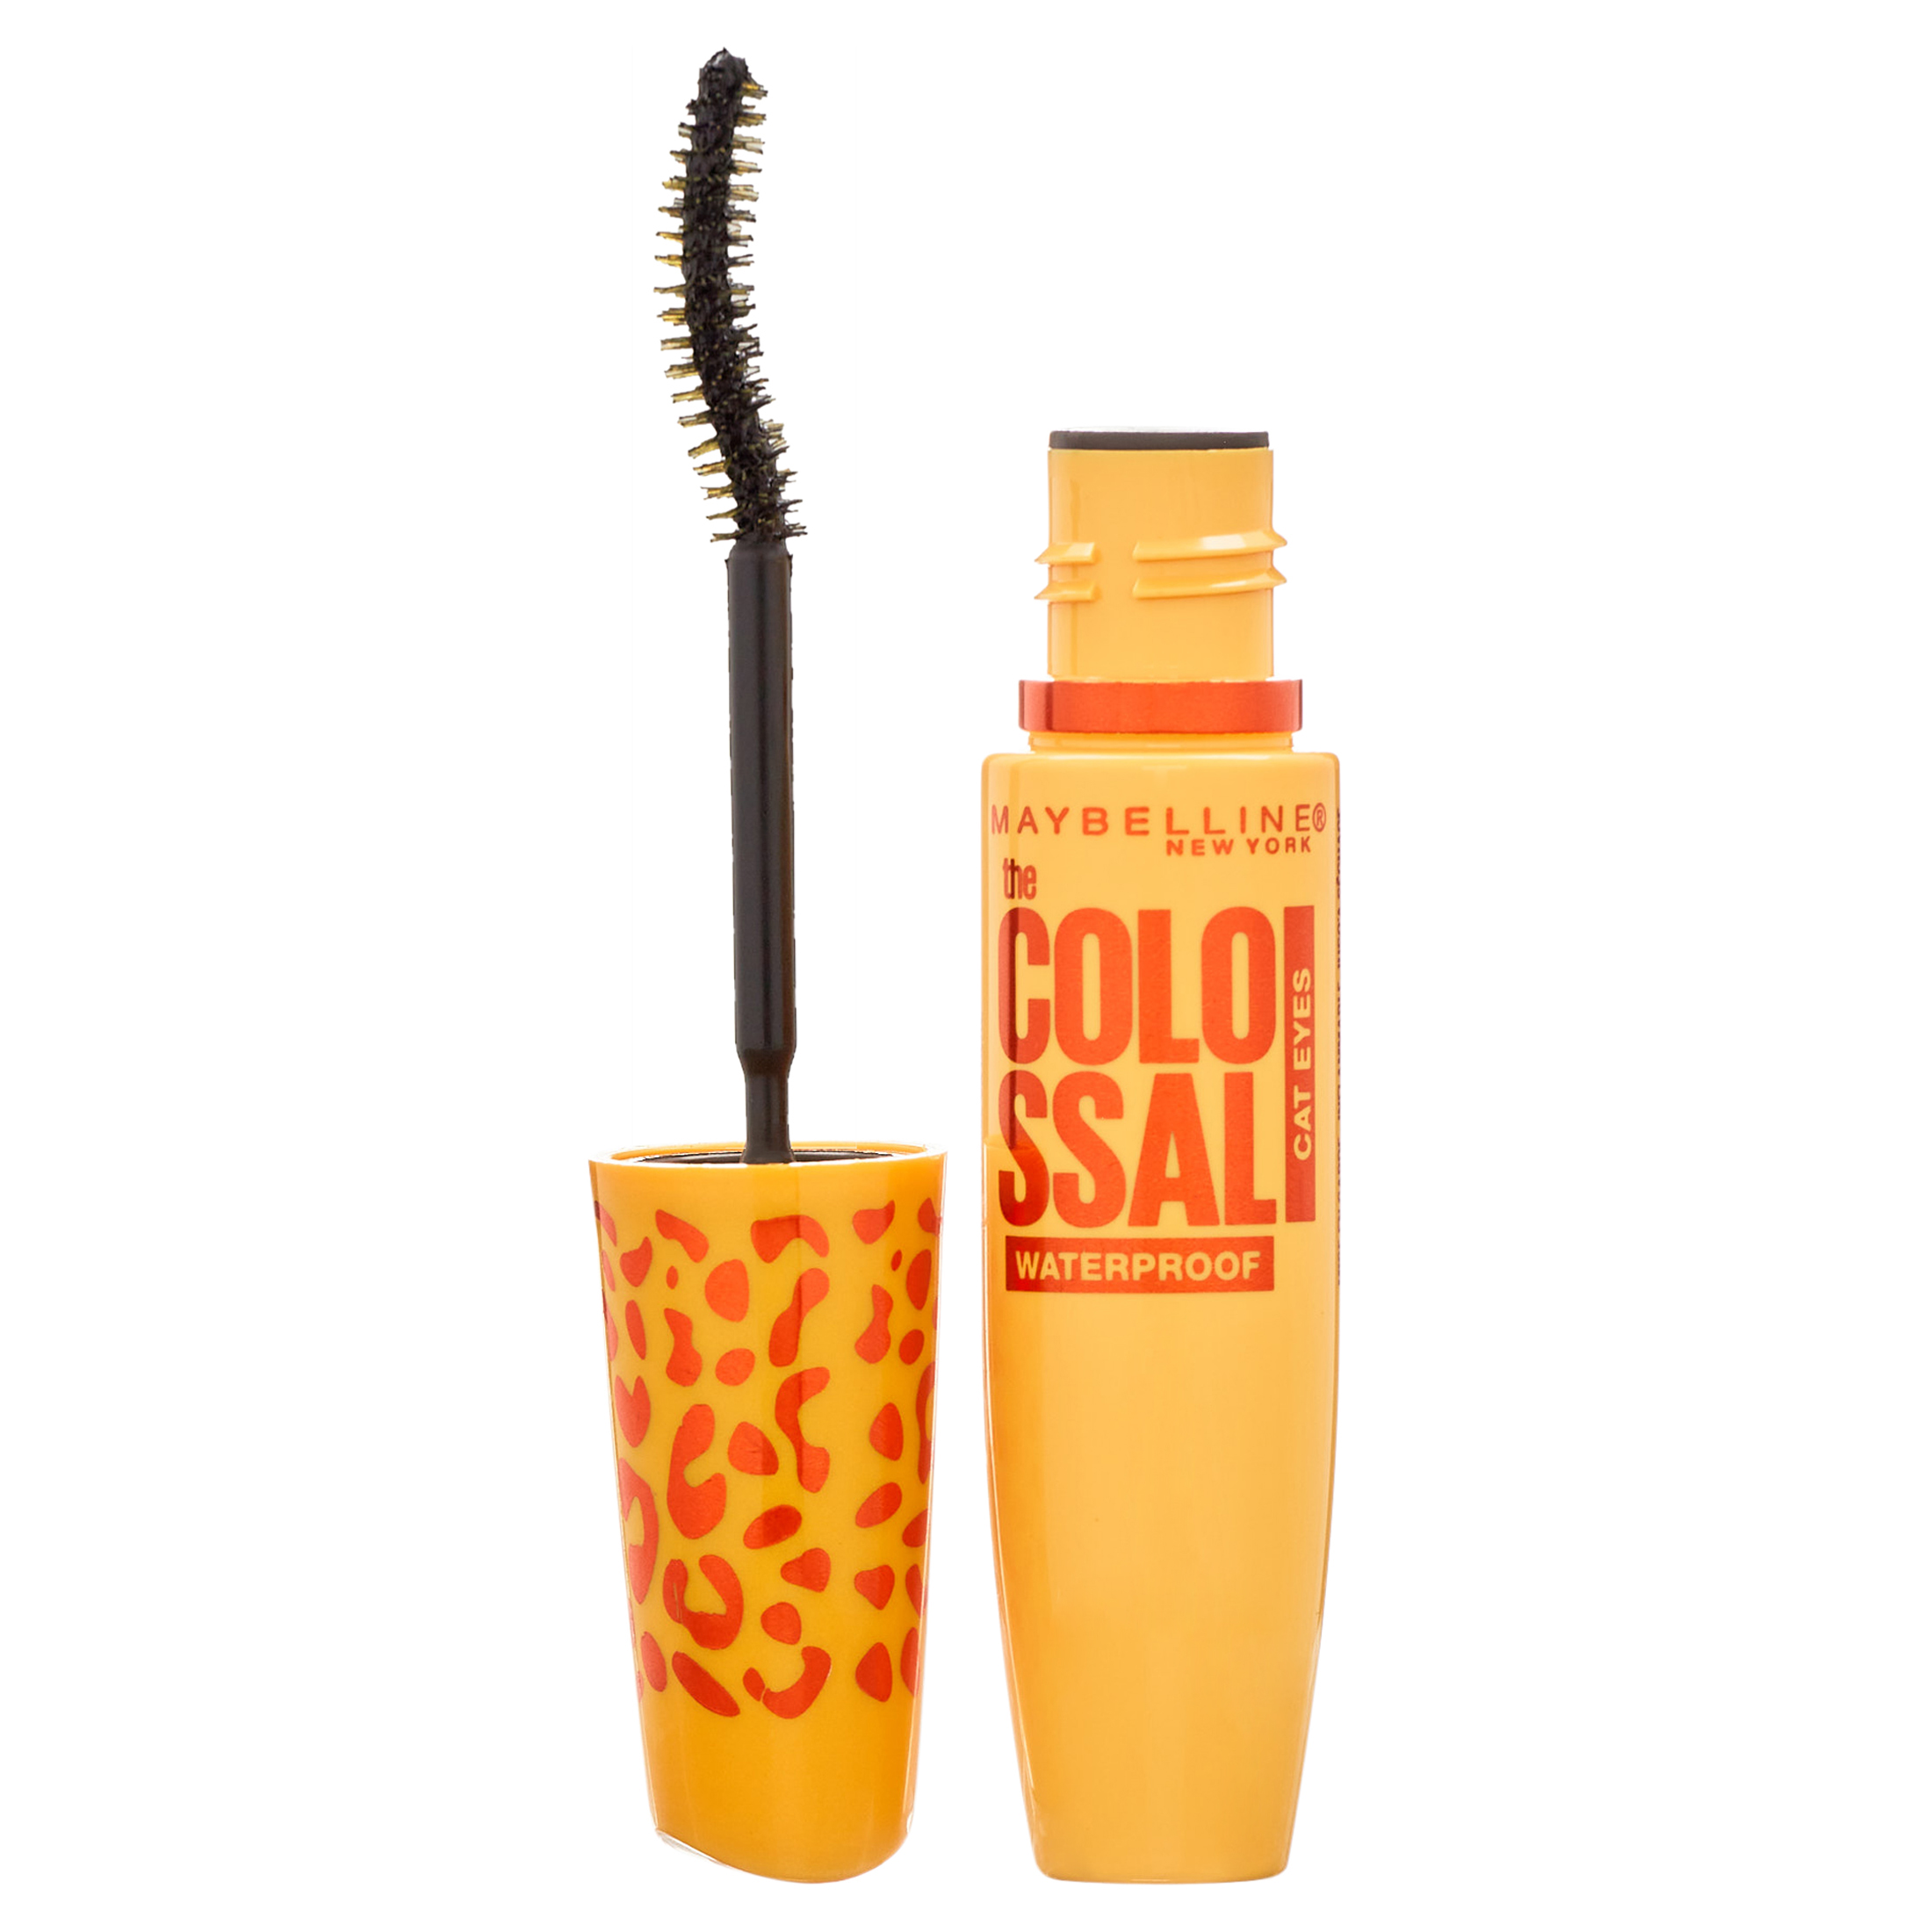 Maybelline Volum Express The Colossal Cat Eyes Waterproof Mascara, Glam Black - image 1 of 8